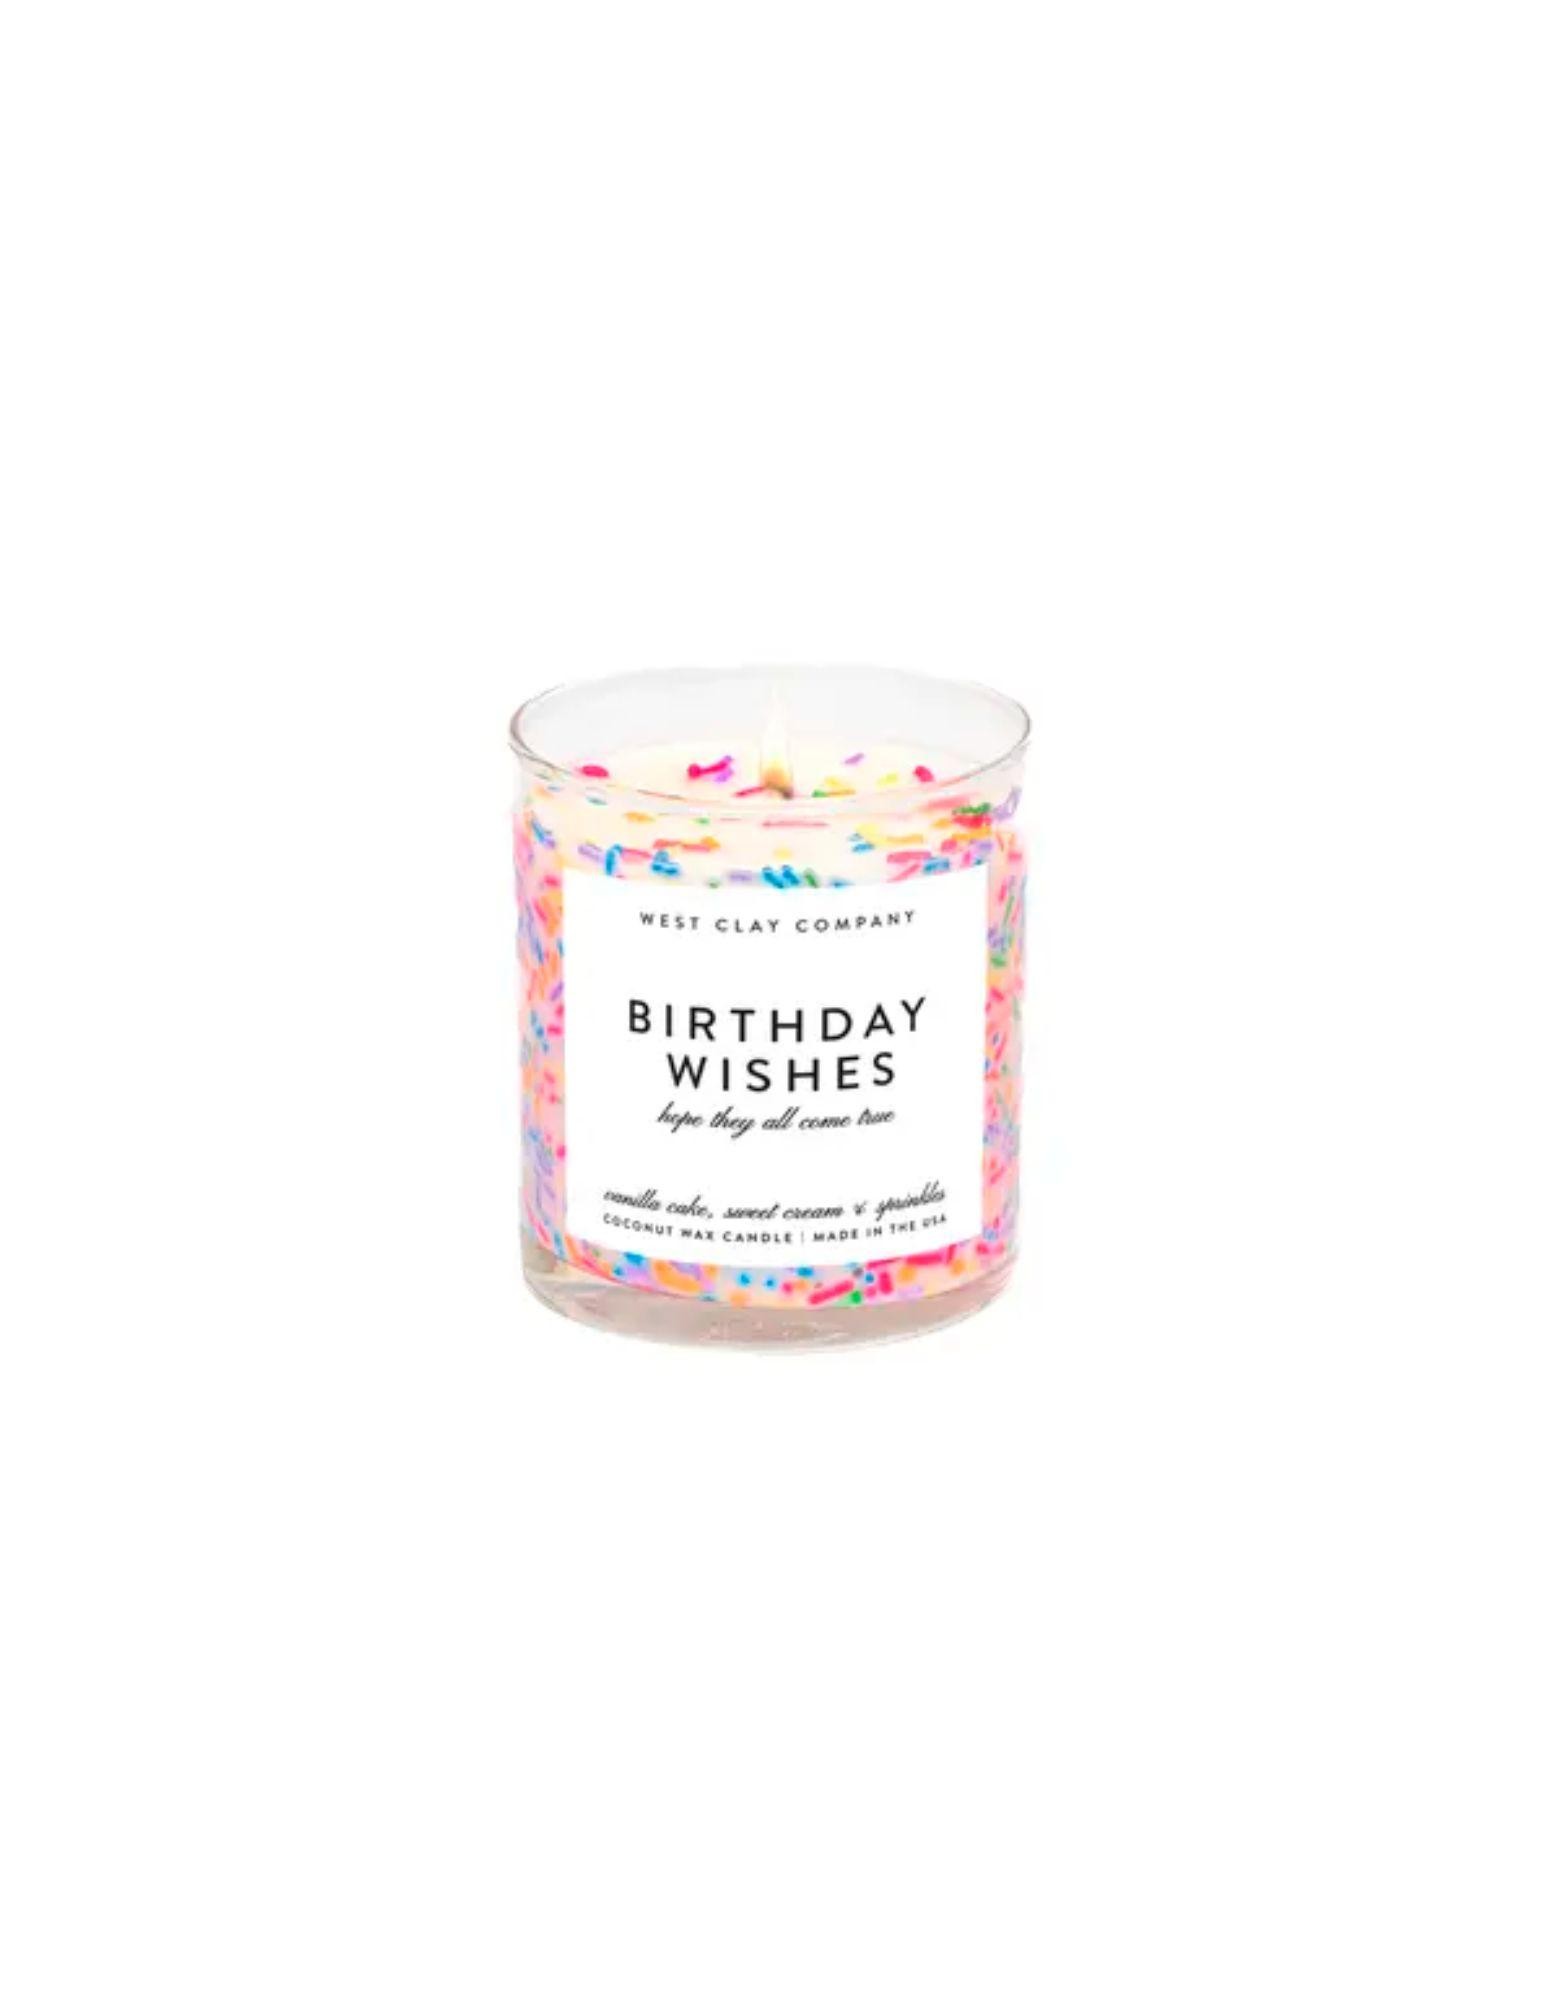 Birthday Wishes Sprinkle Candle Vanilla Bday Cake Scented Gift Box